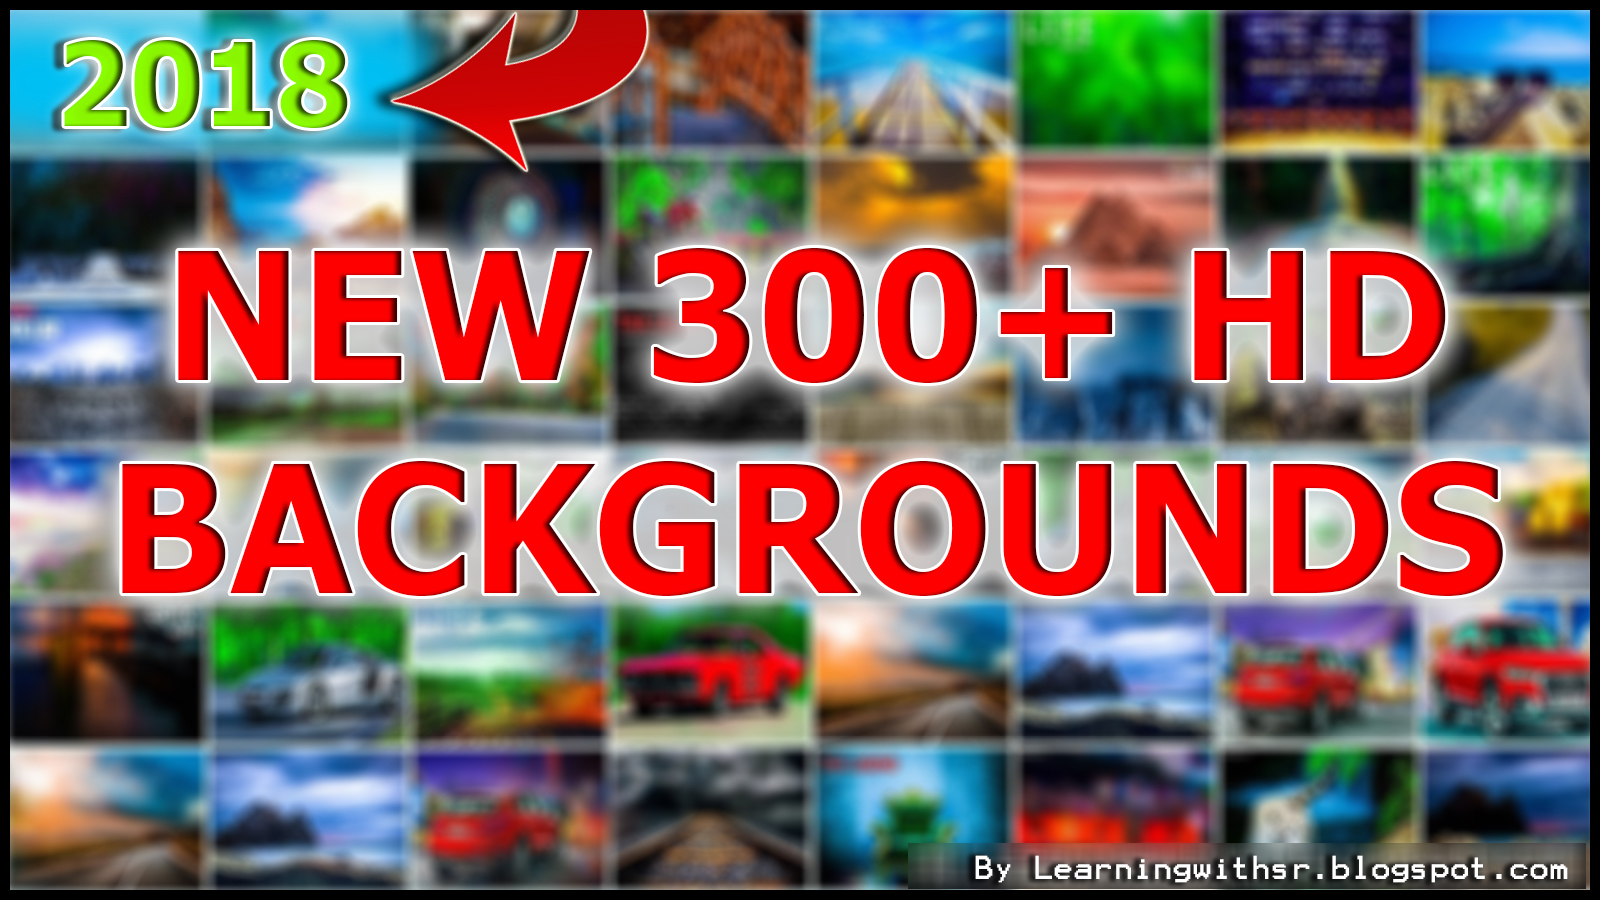 300 Hd Backgrouds One Click Download 2018 LEARNING WITH SR